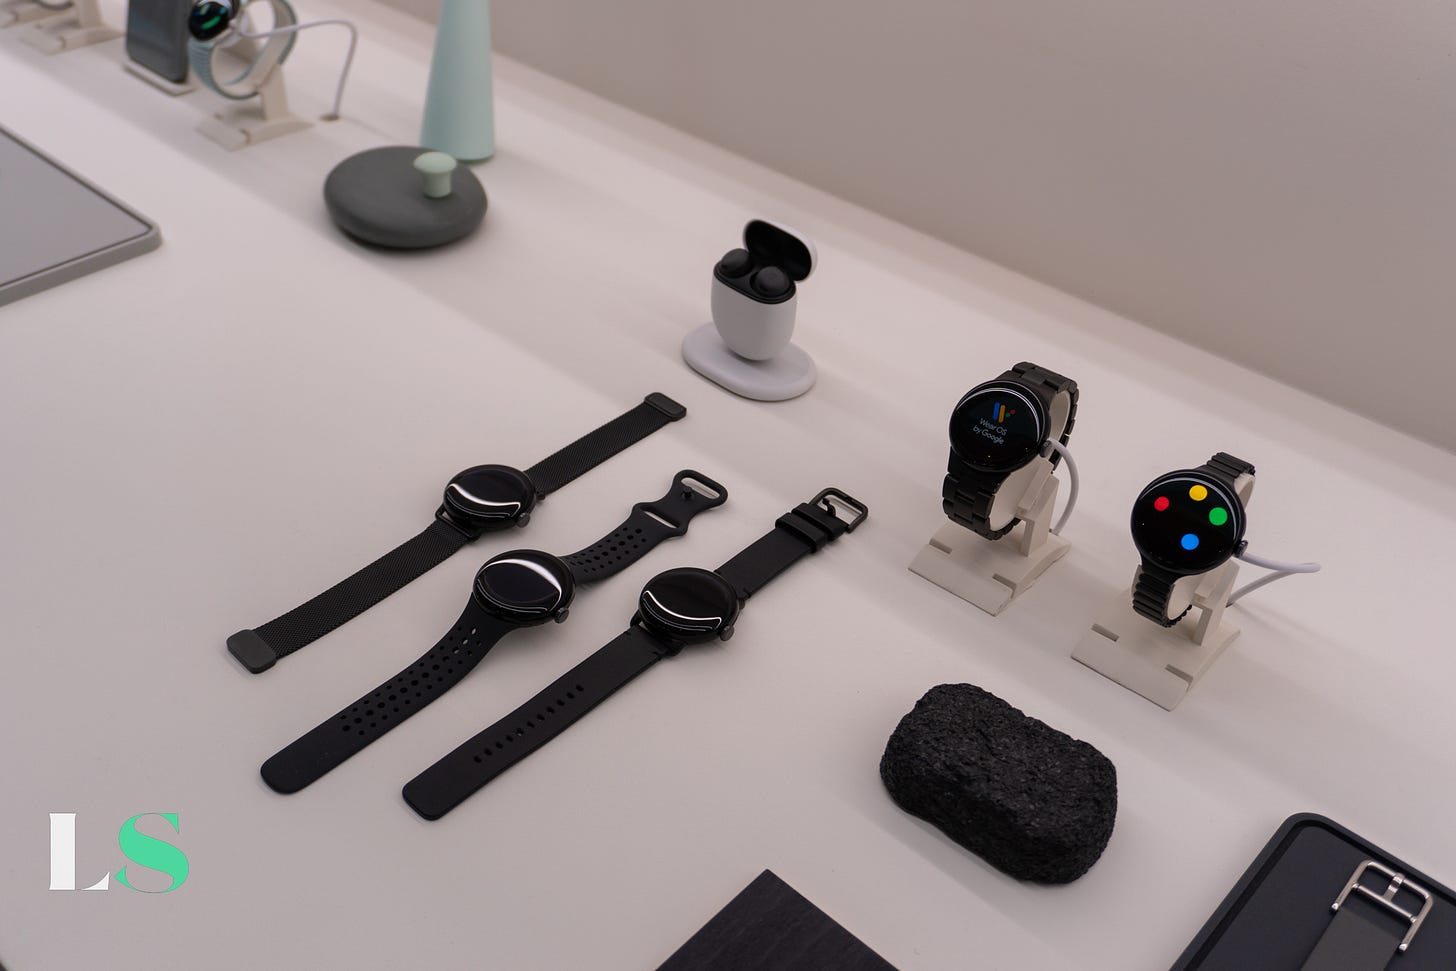 Google Pixel Watch 2 on display during its event in New York City.